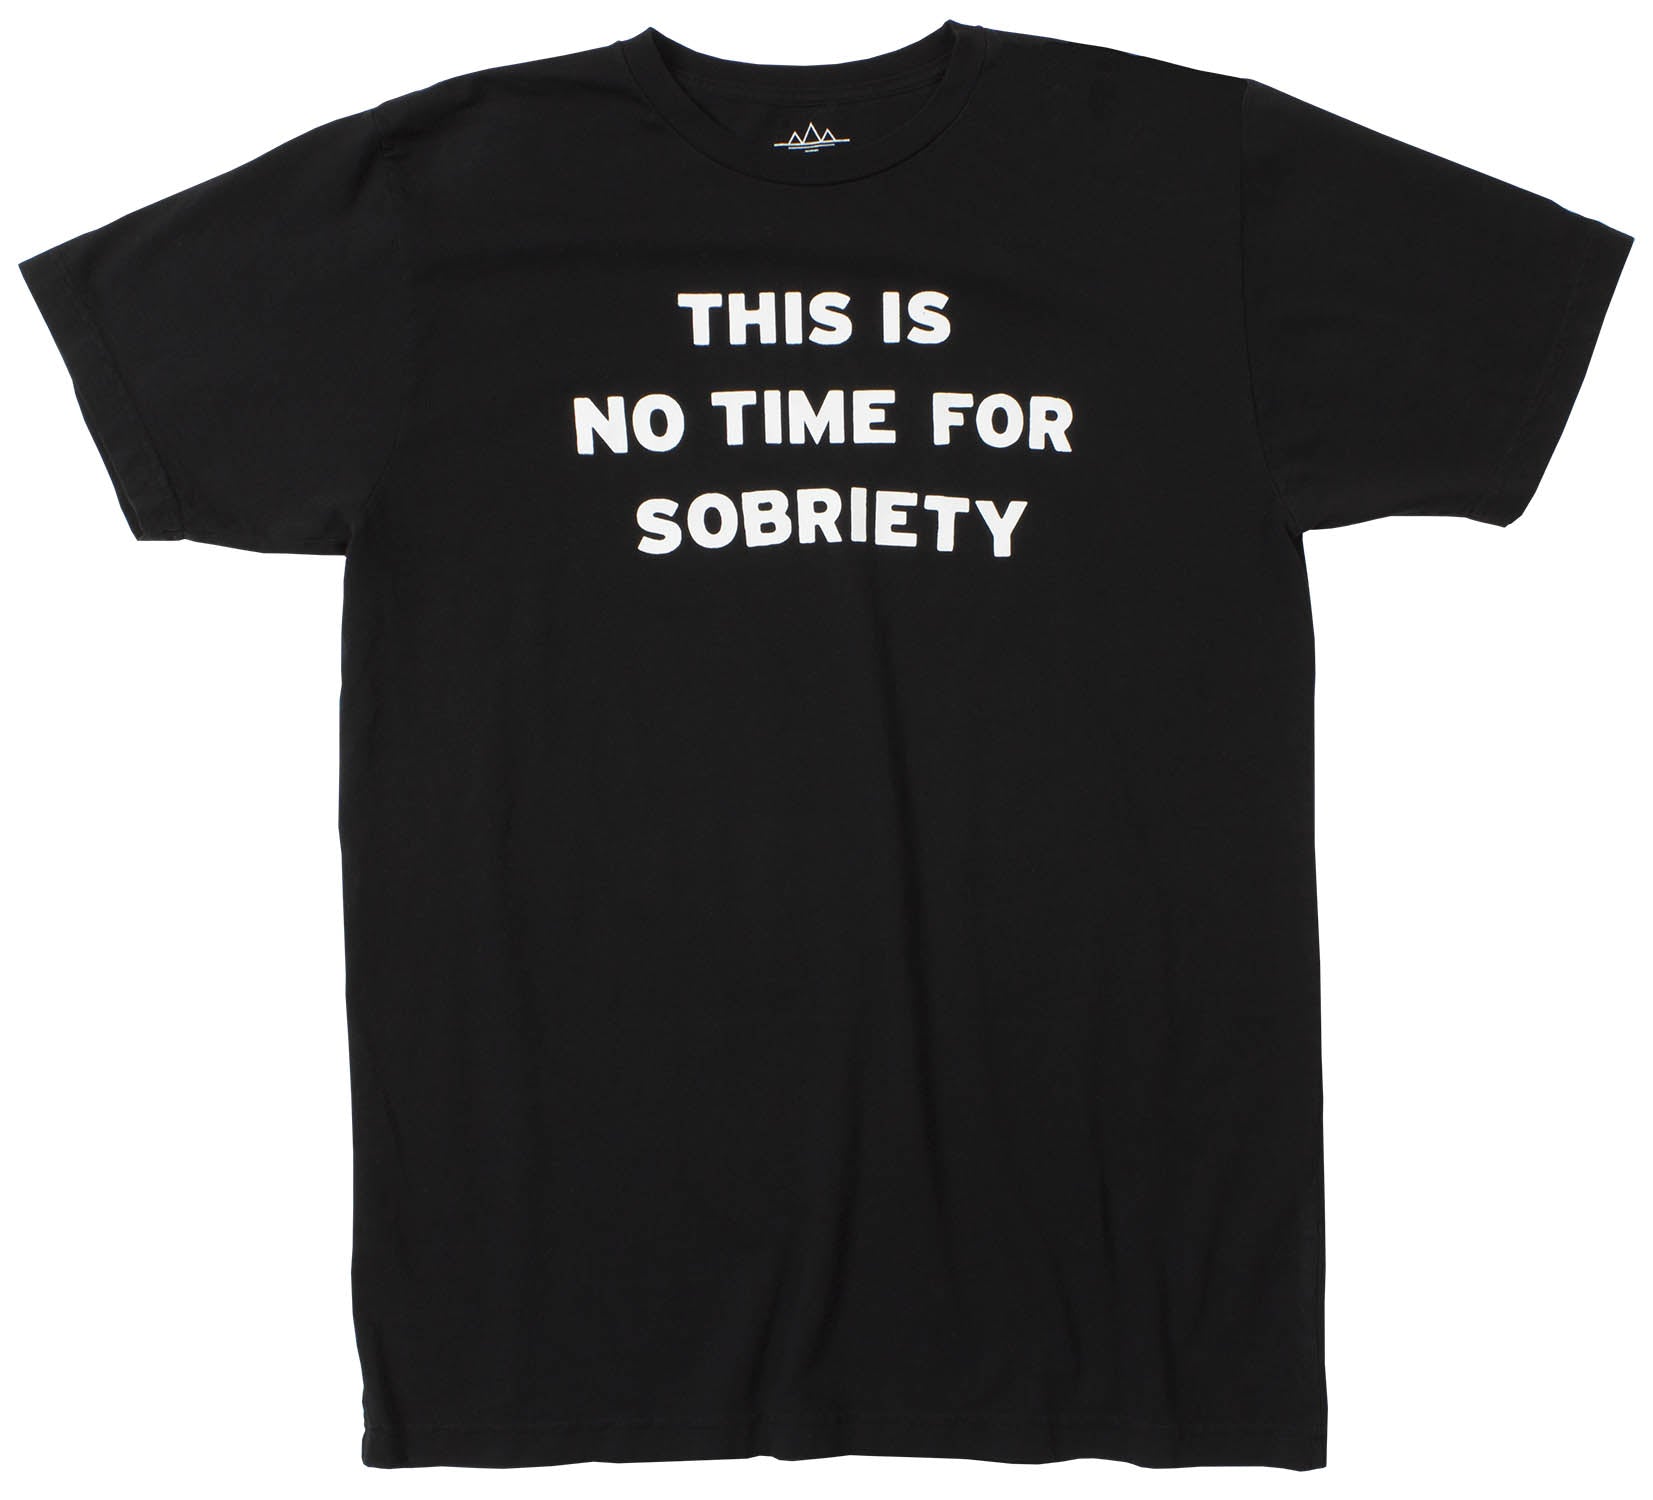 No Time For Sobriety Men's Funny Black Graphic Tee by Altru Apparel